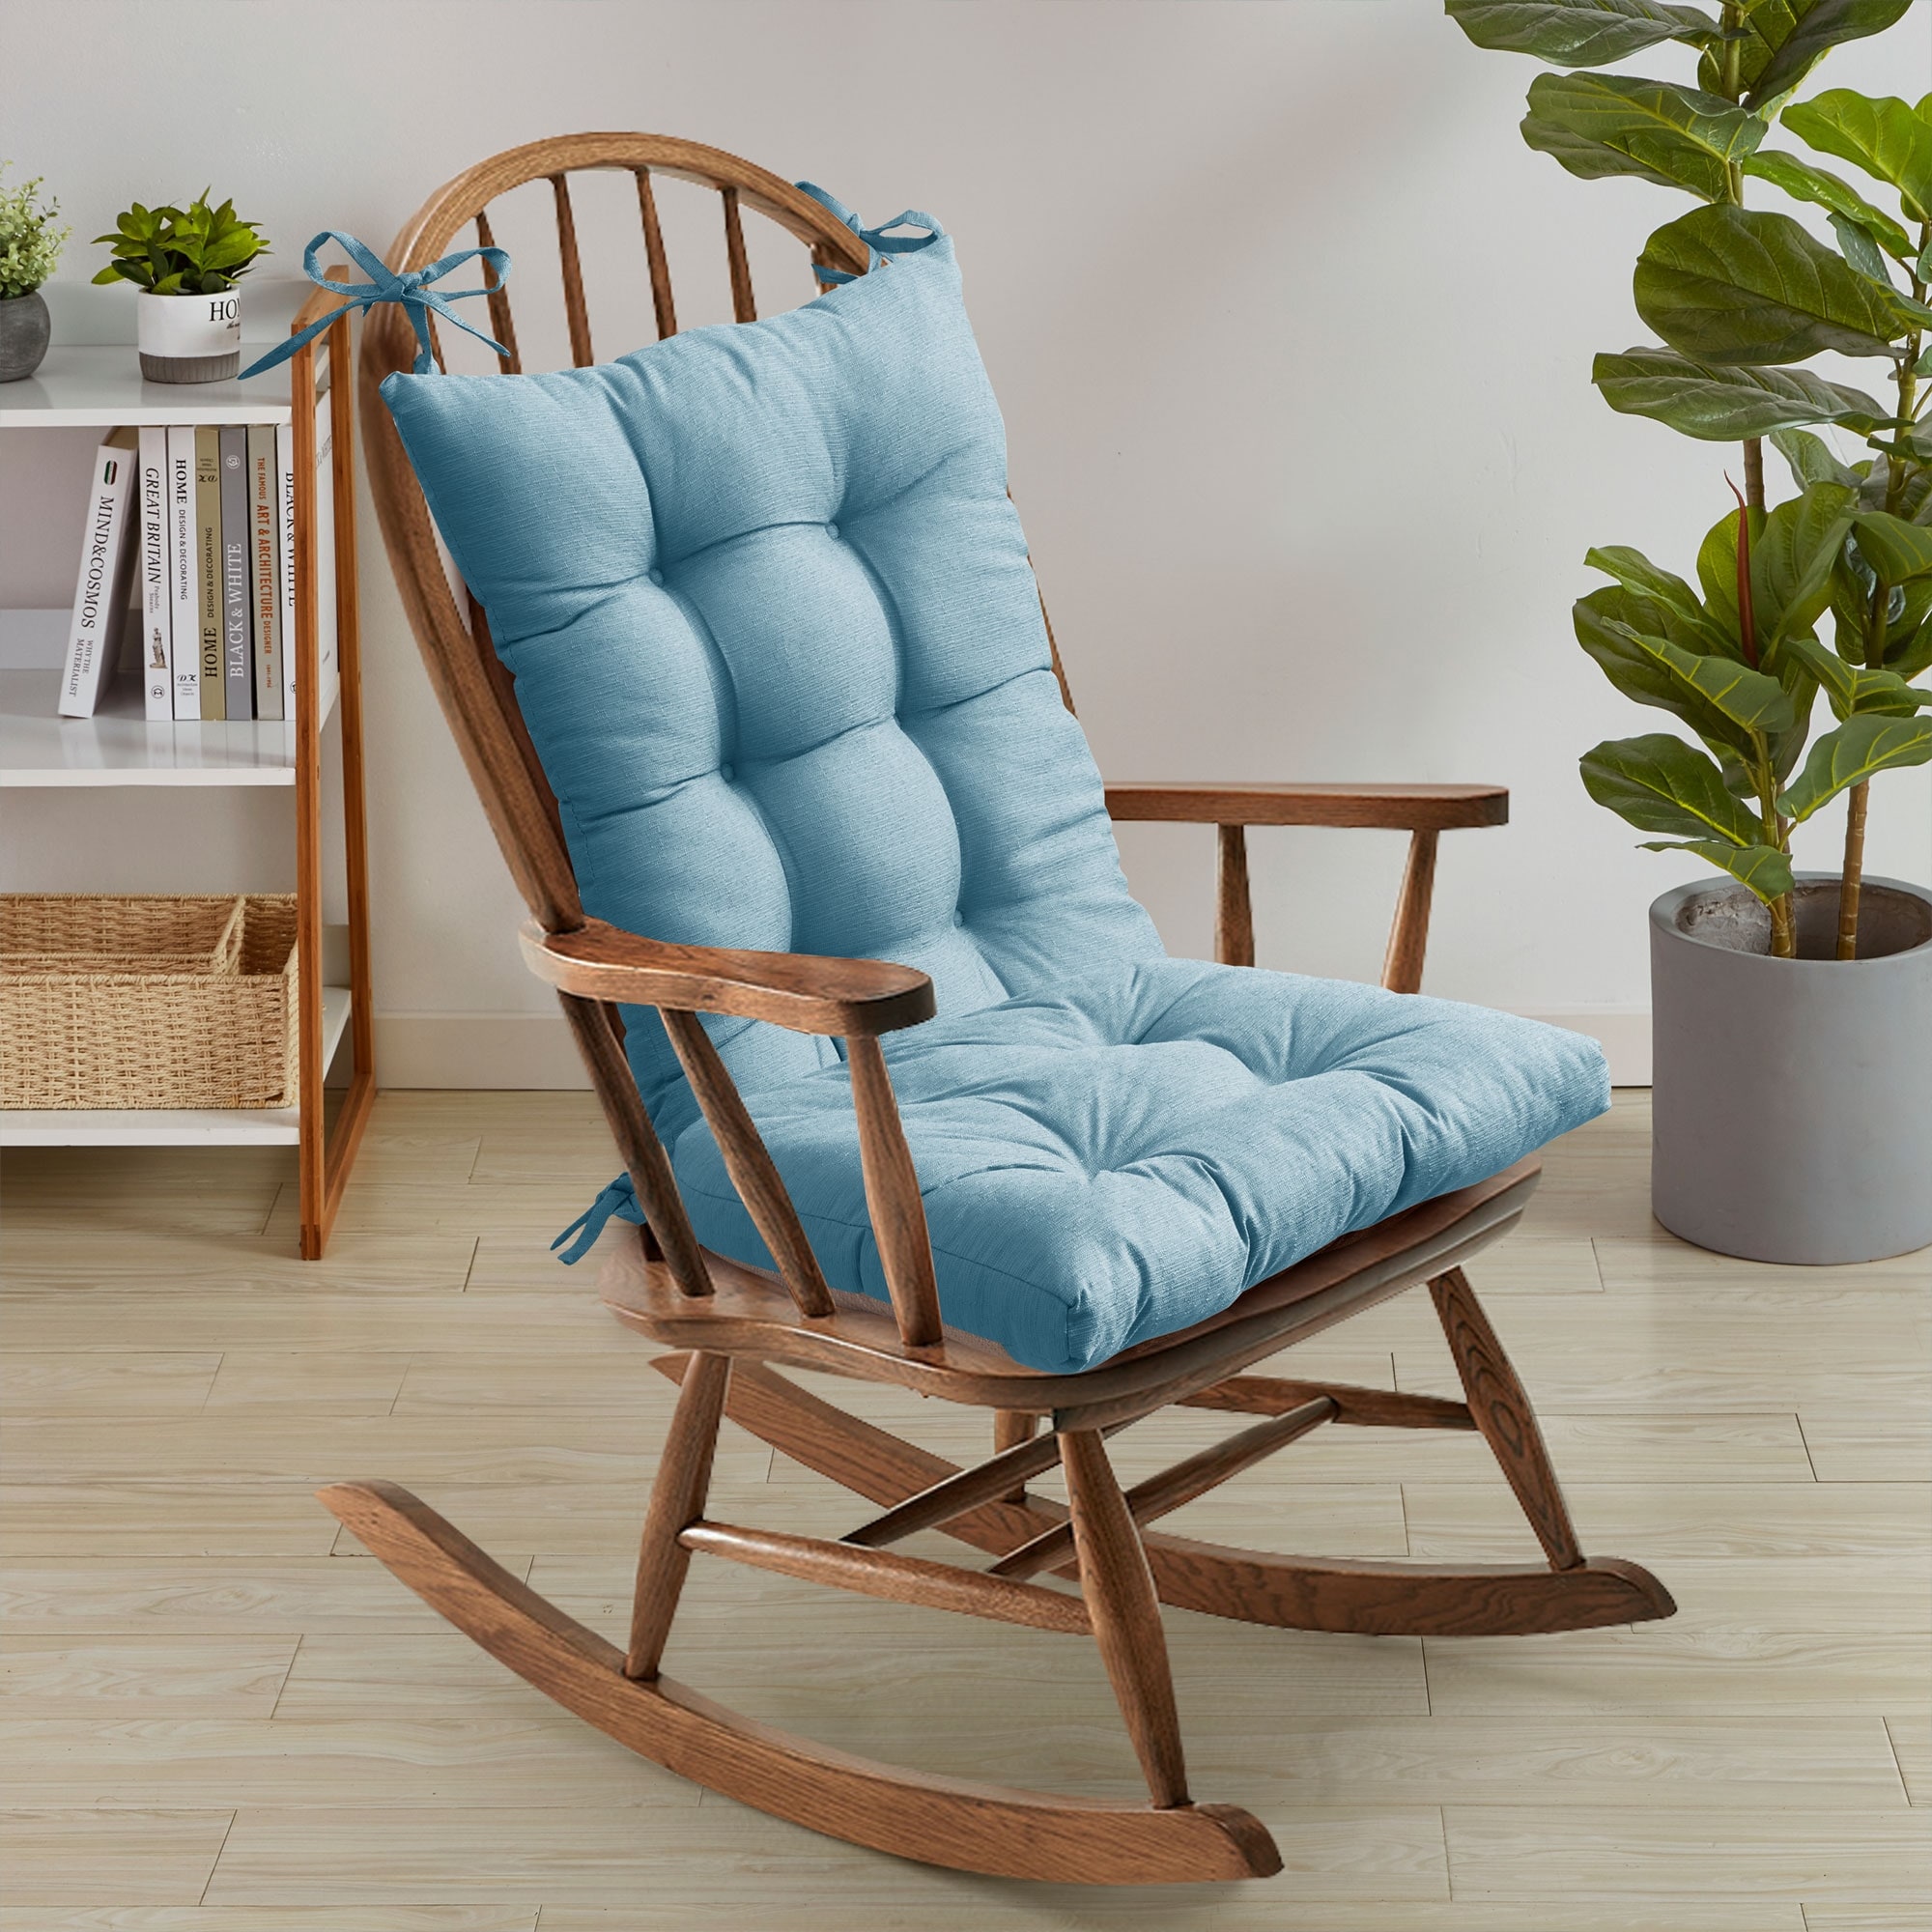 https://ak1.ostkcdn.com/images/products/is/images/direct/ffae1995642bed38f3b6150de382b250a42ffa43/Sweet-Home-Collection-Rocking-Chair-Cushion-Set.jpg